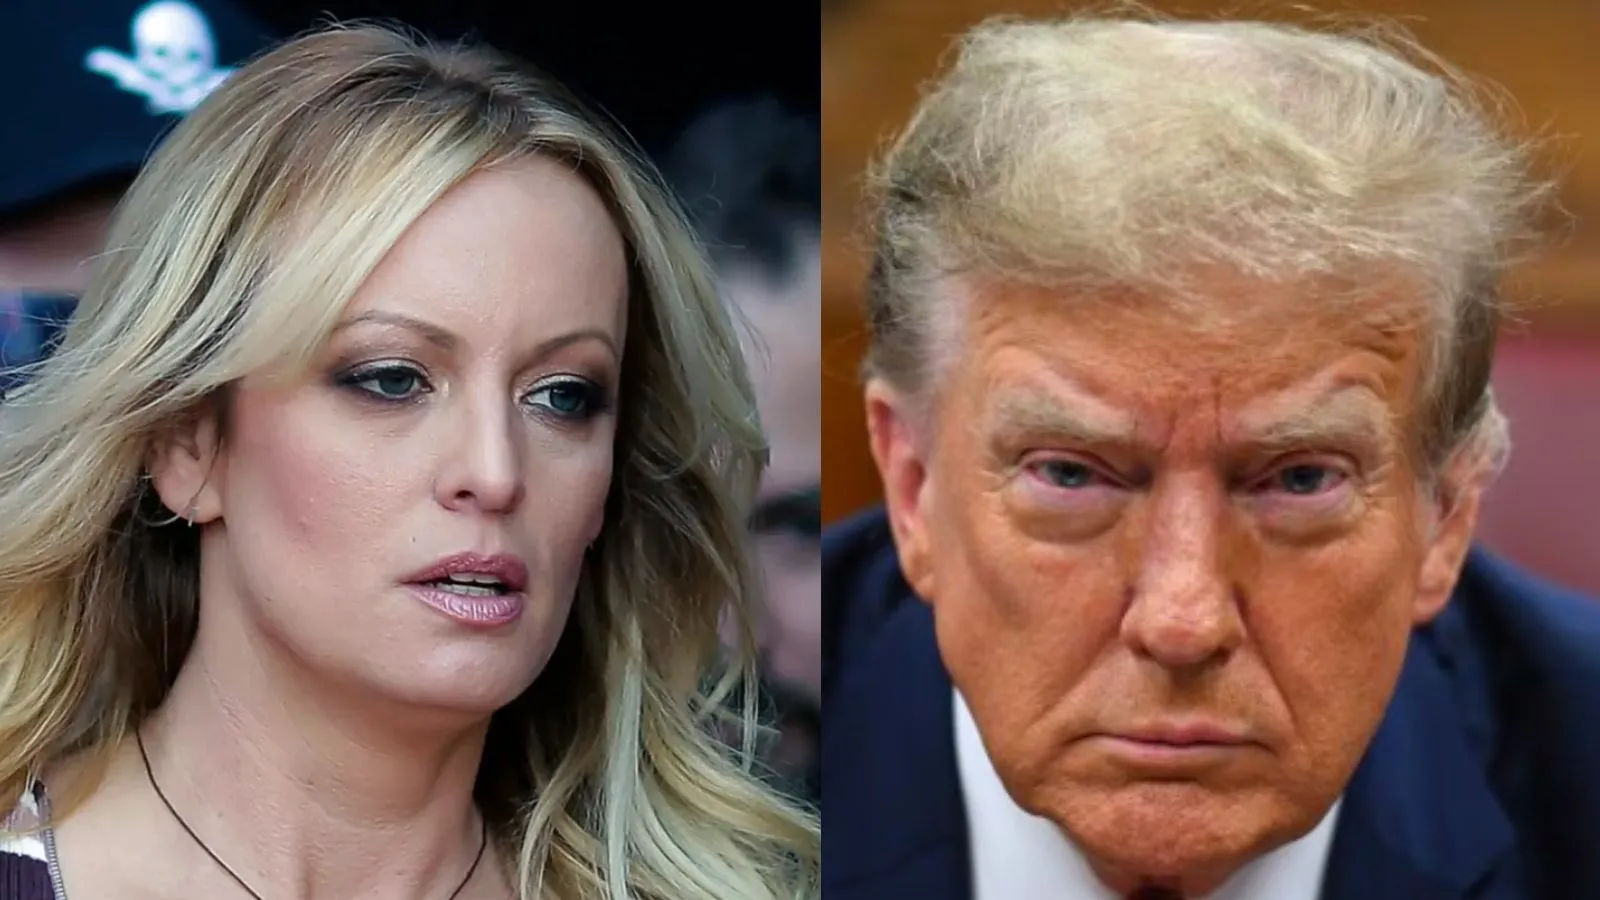 Donald Trump vs Stormy Daniels: All you need to know about the case